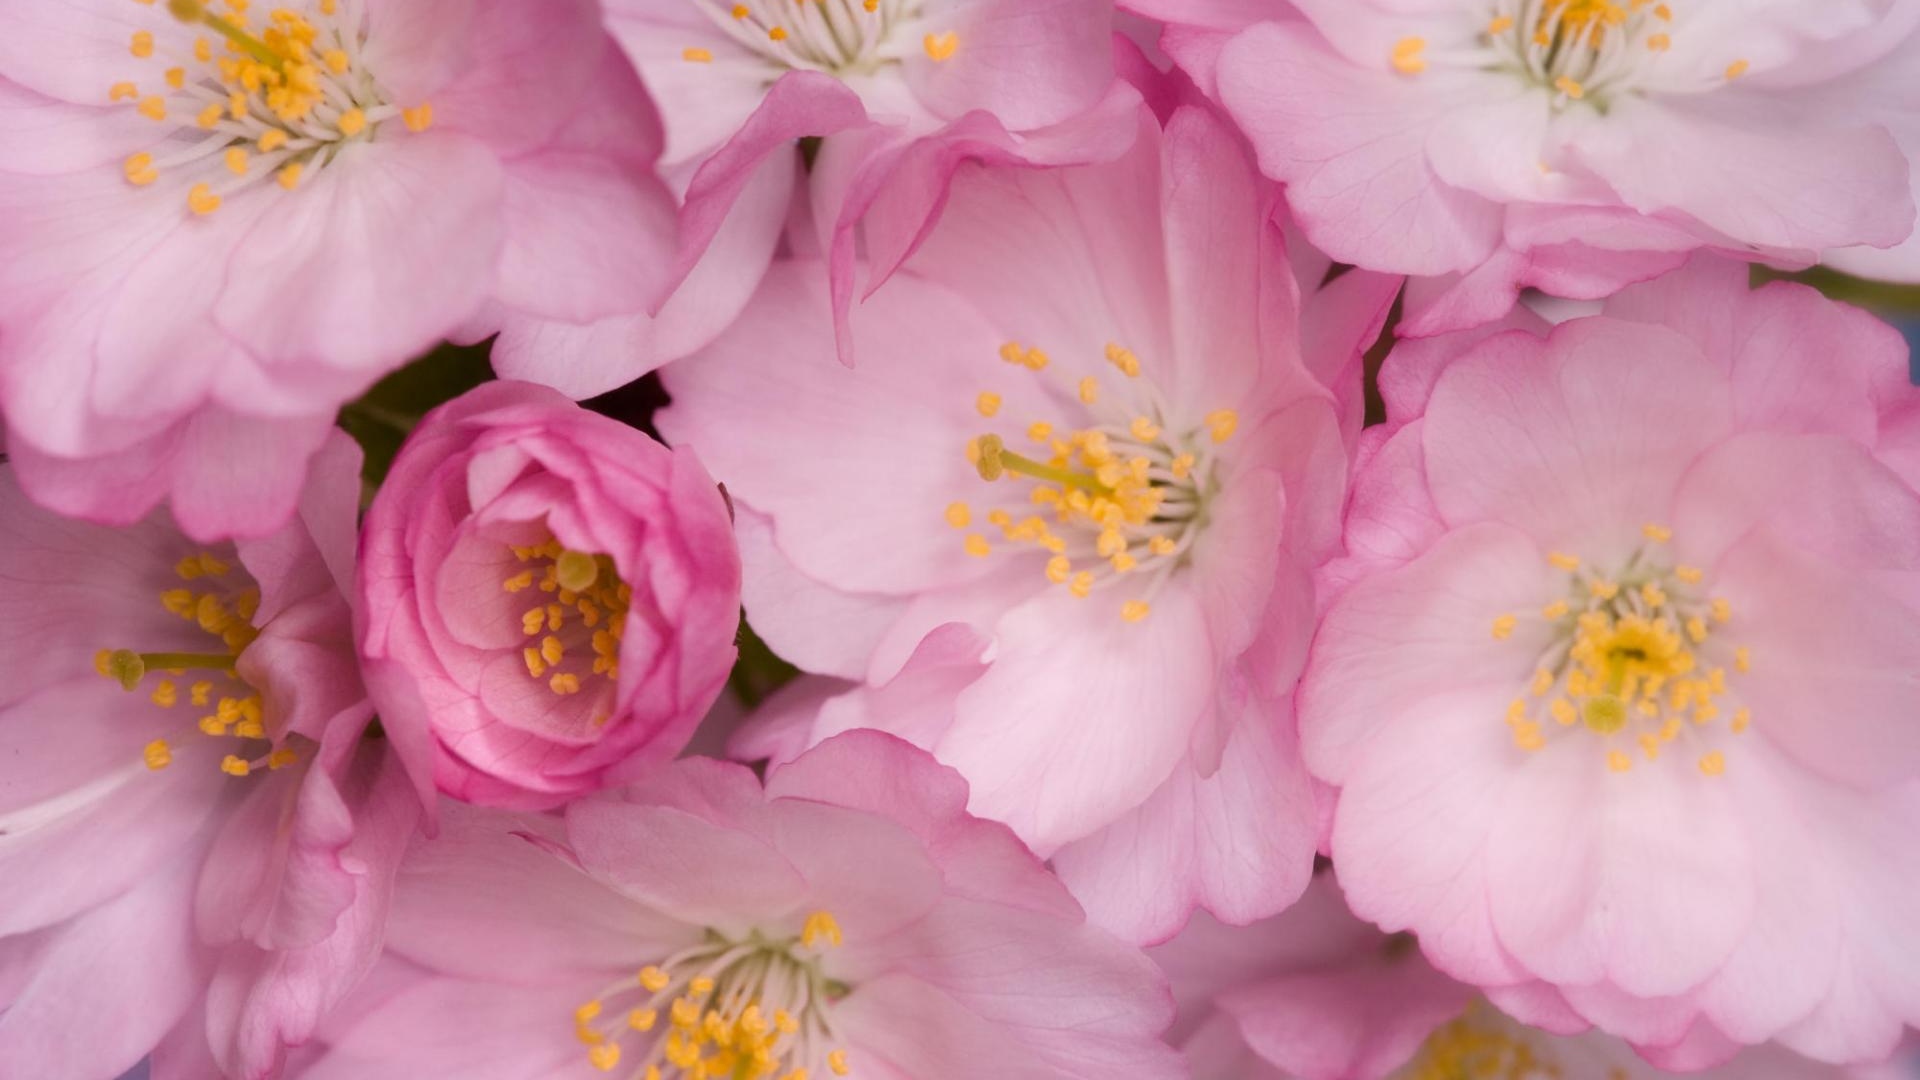 Download Wallpaper 1920x1080 wild roses flowers pink yellow